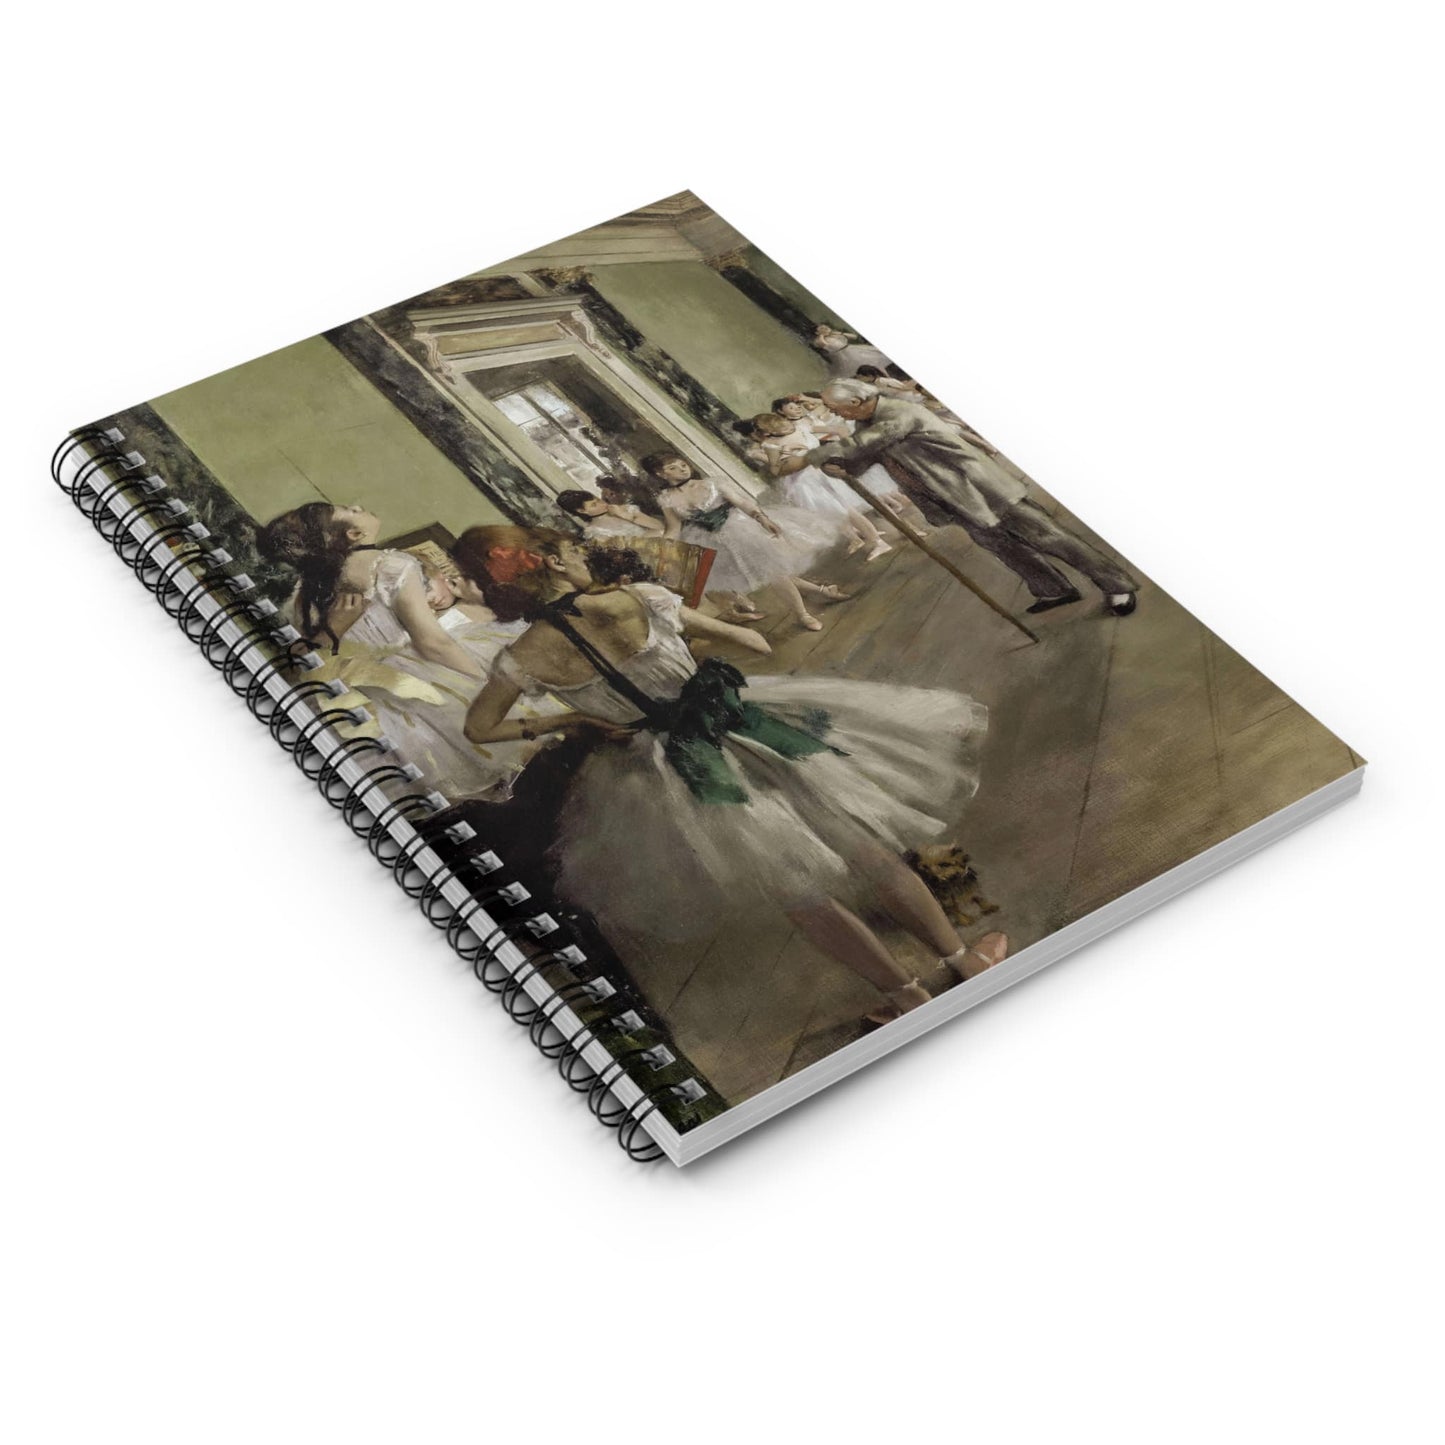 Ballerina Spiral Notebook Laying Flat on White Surface